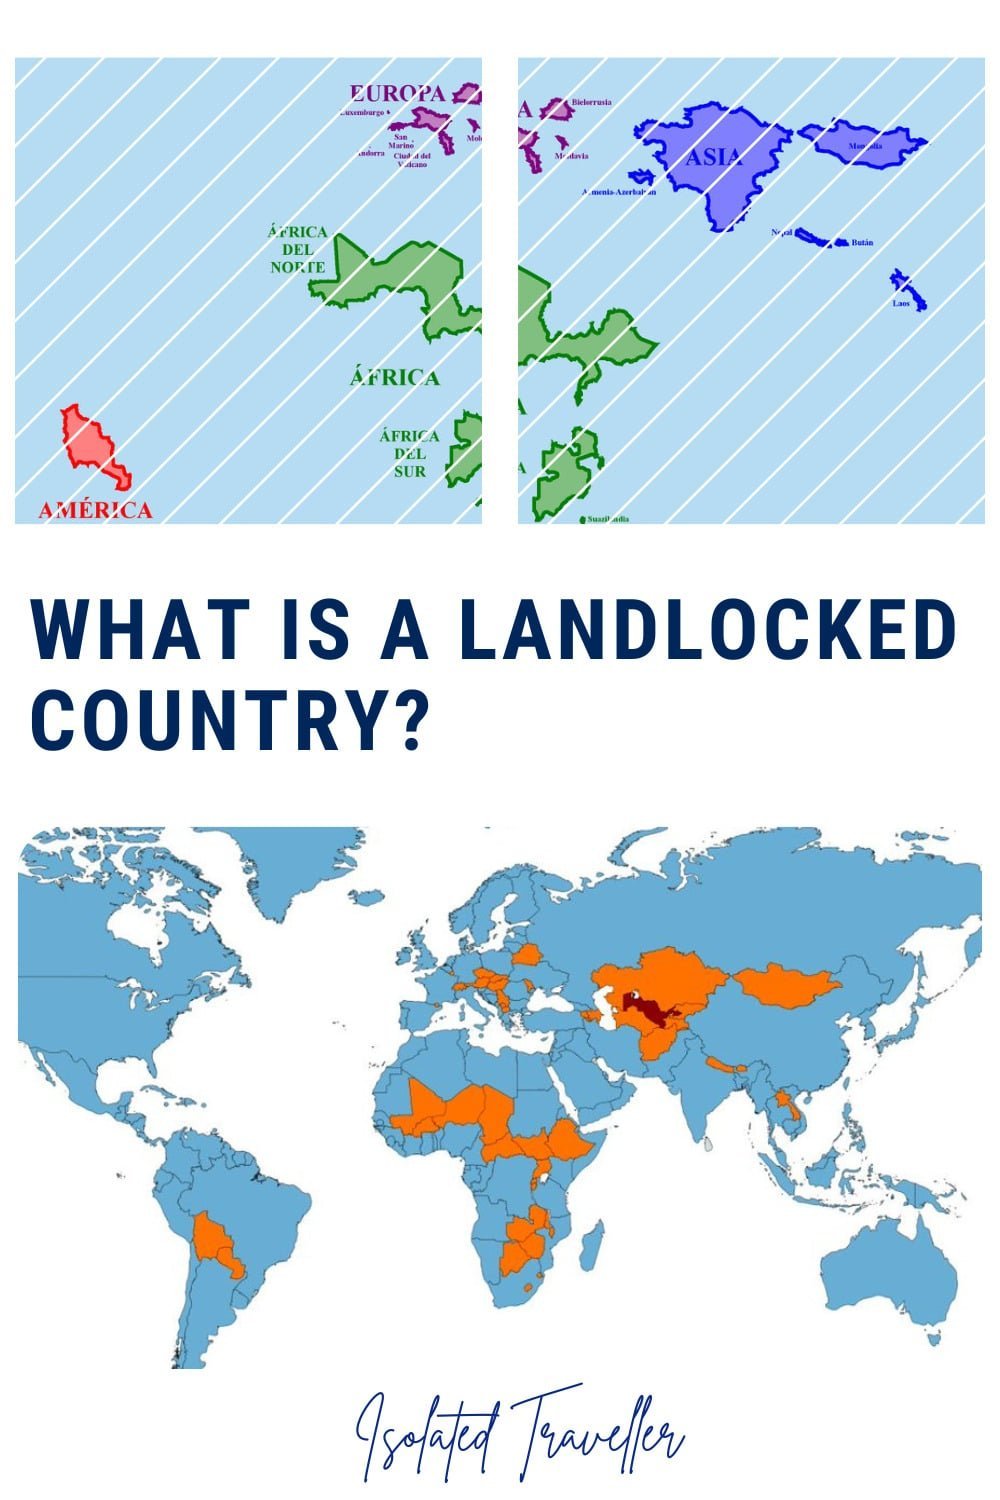 What Is A Landlocked Country?